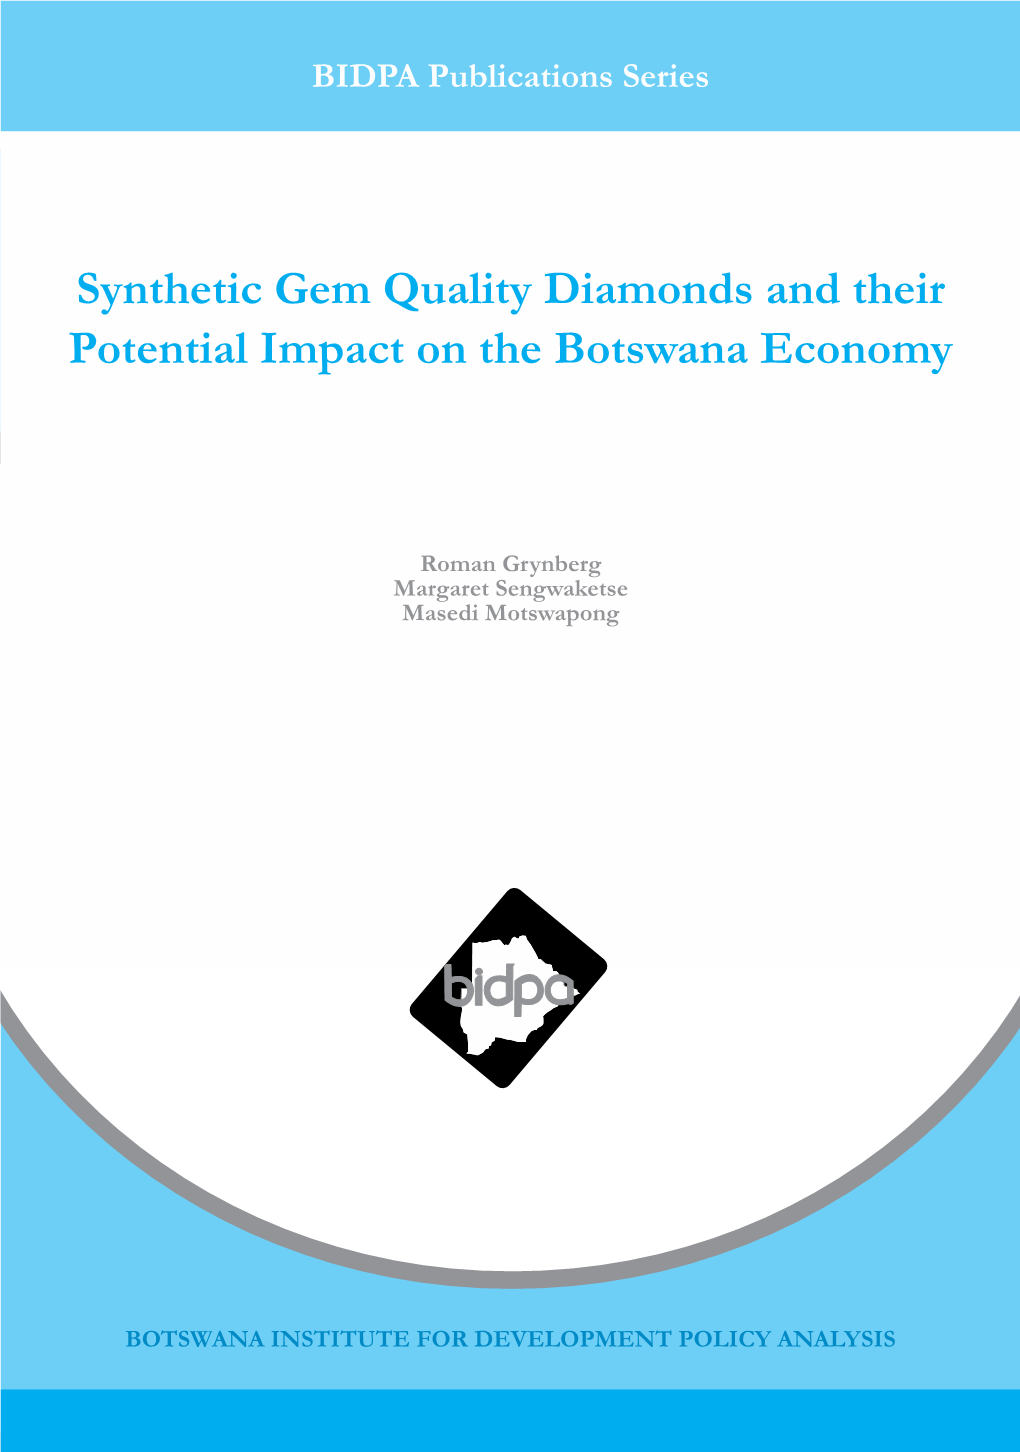 Synthetic Gem Quality Diamonds and Their Potential Impact on the Botswana Economy